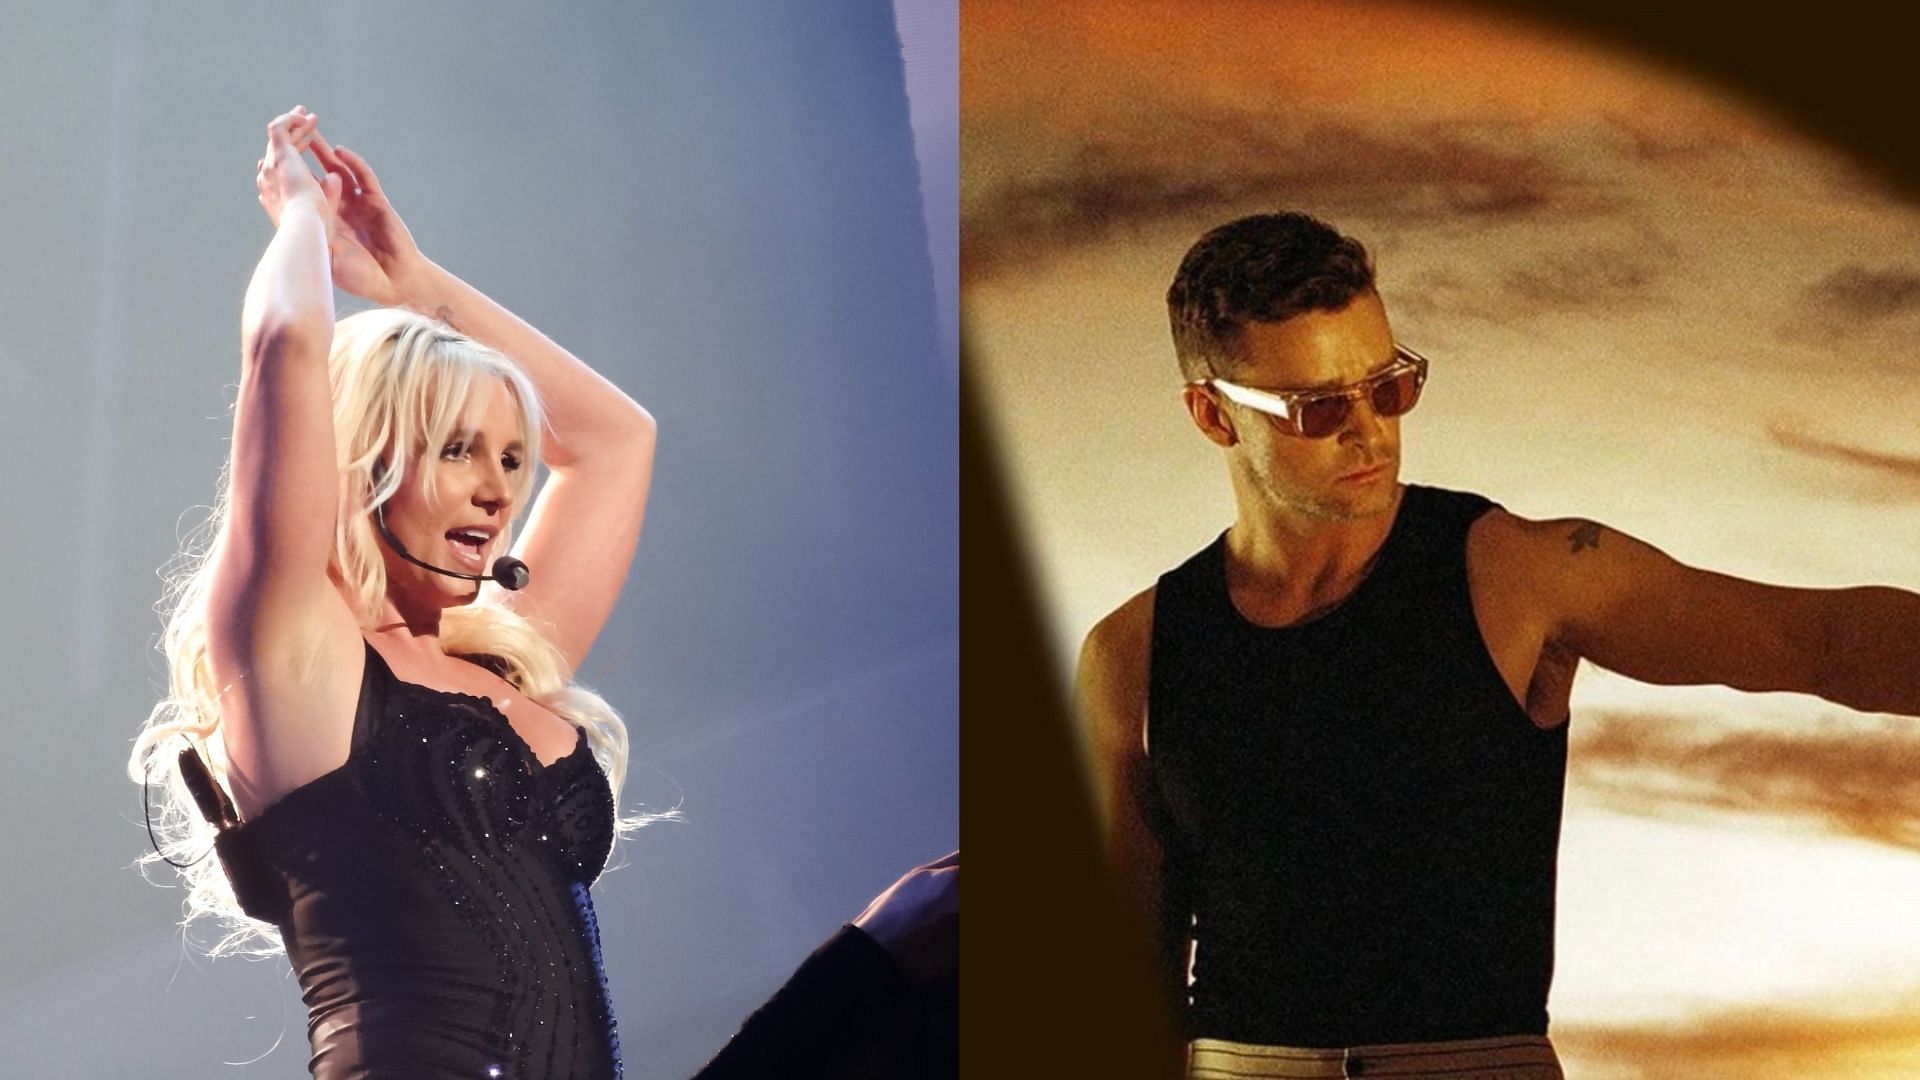 Britney Spears and Justin Timberlake feud continues. (Images via Instagram/@justintimberlake &amp; Wikimedia Commons/rhysadams)